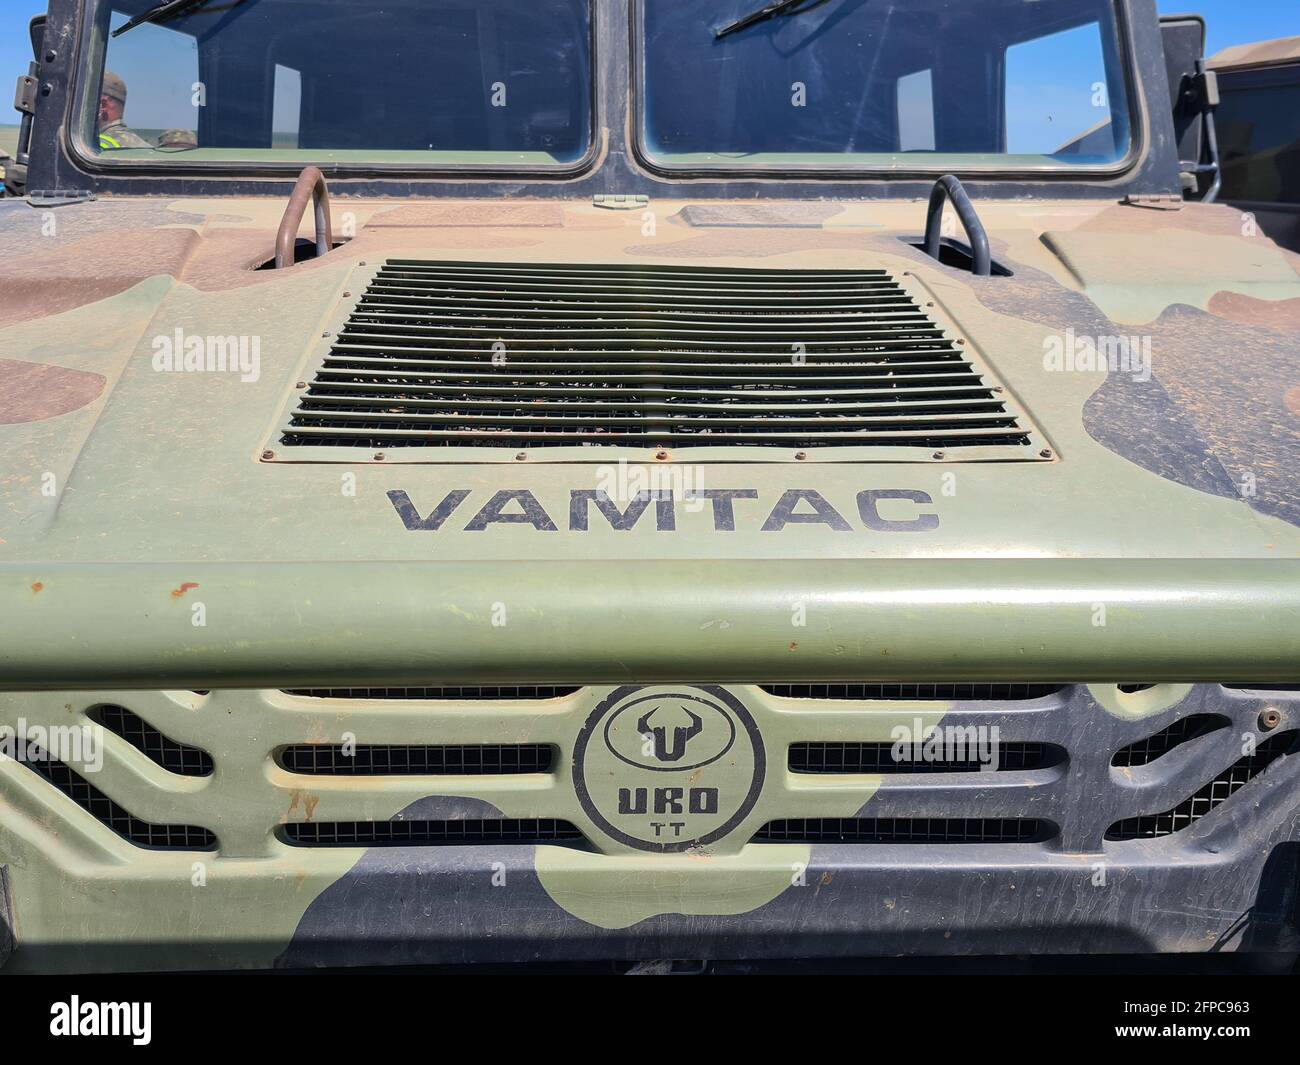 Smardan, Romania - May 11, 2021: Details with the logo of a Romanian Army Uro Vamtac armored vehicle. Stock Photo